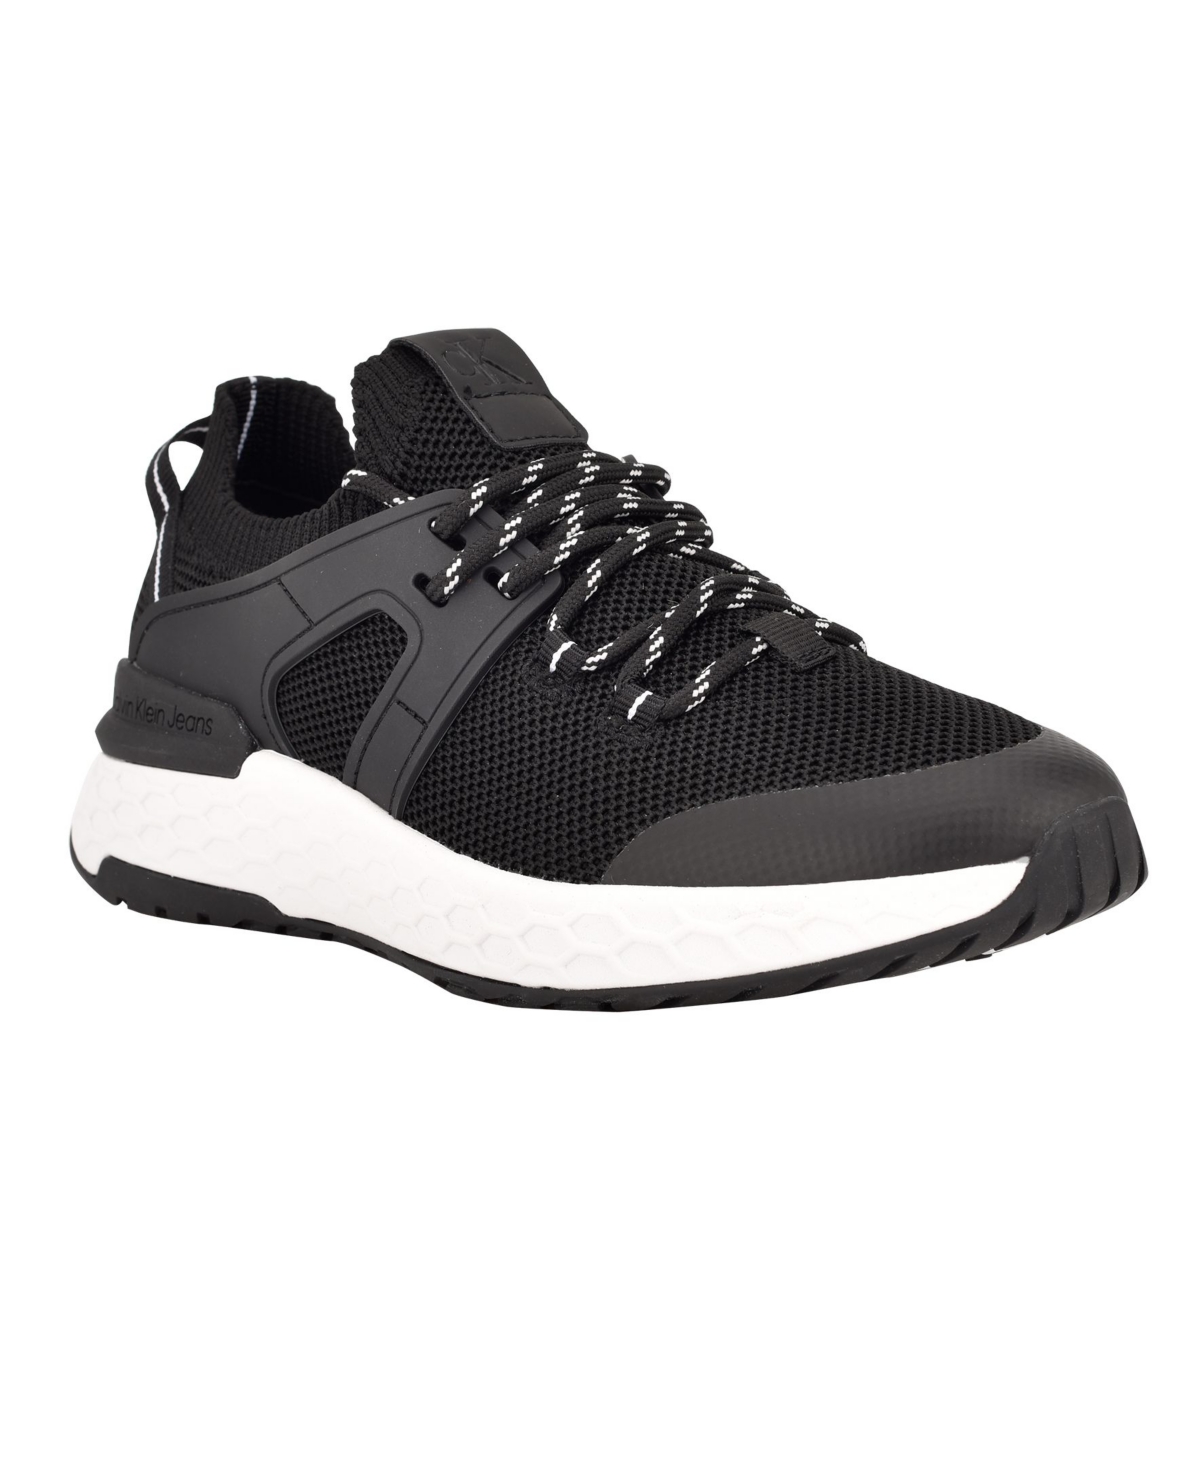 UPC 195972002371 product image for Calvin Klein Women's Aleah Lace-Up Sneakers Women's Shoes | upcitemdb.com